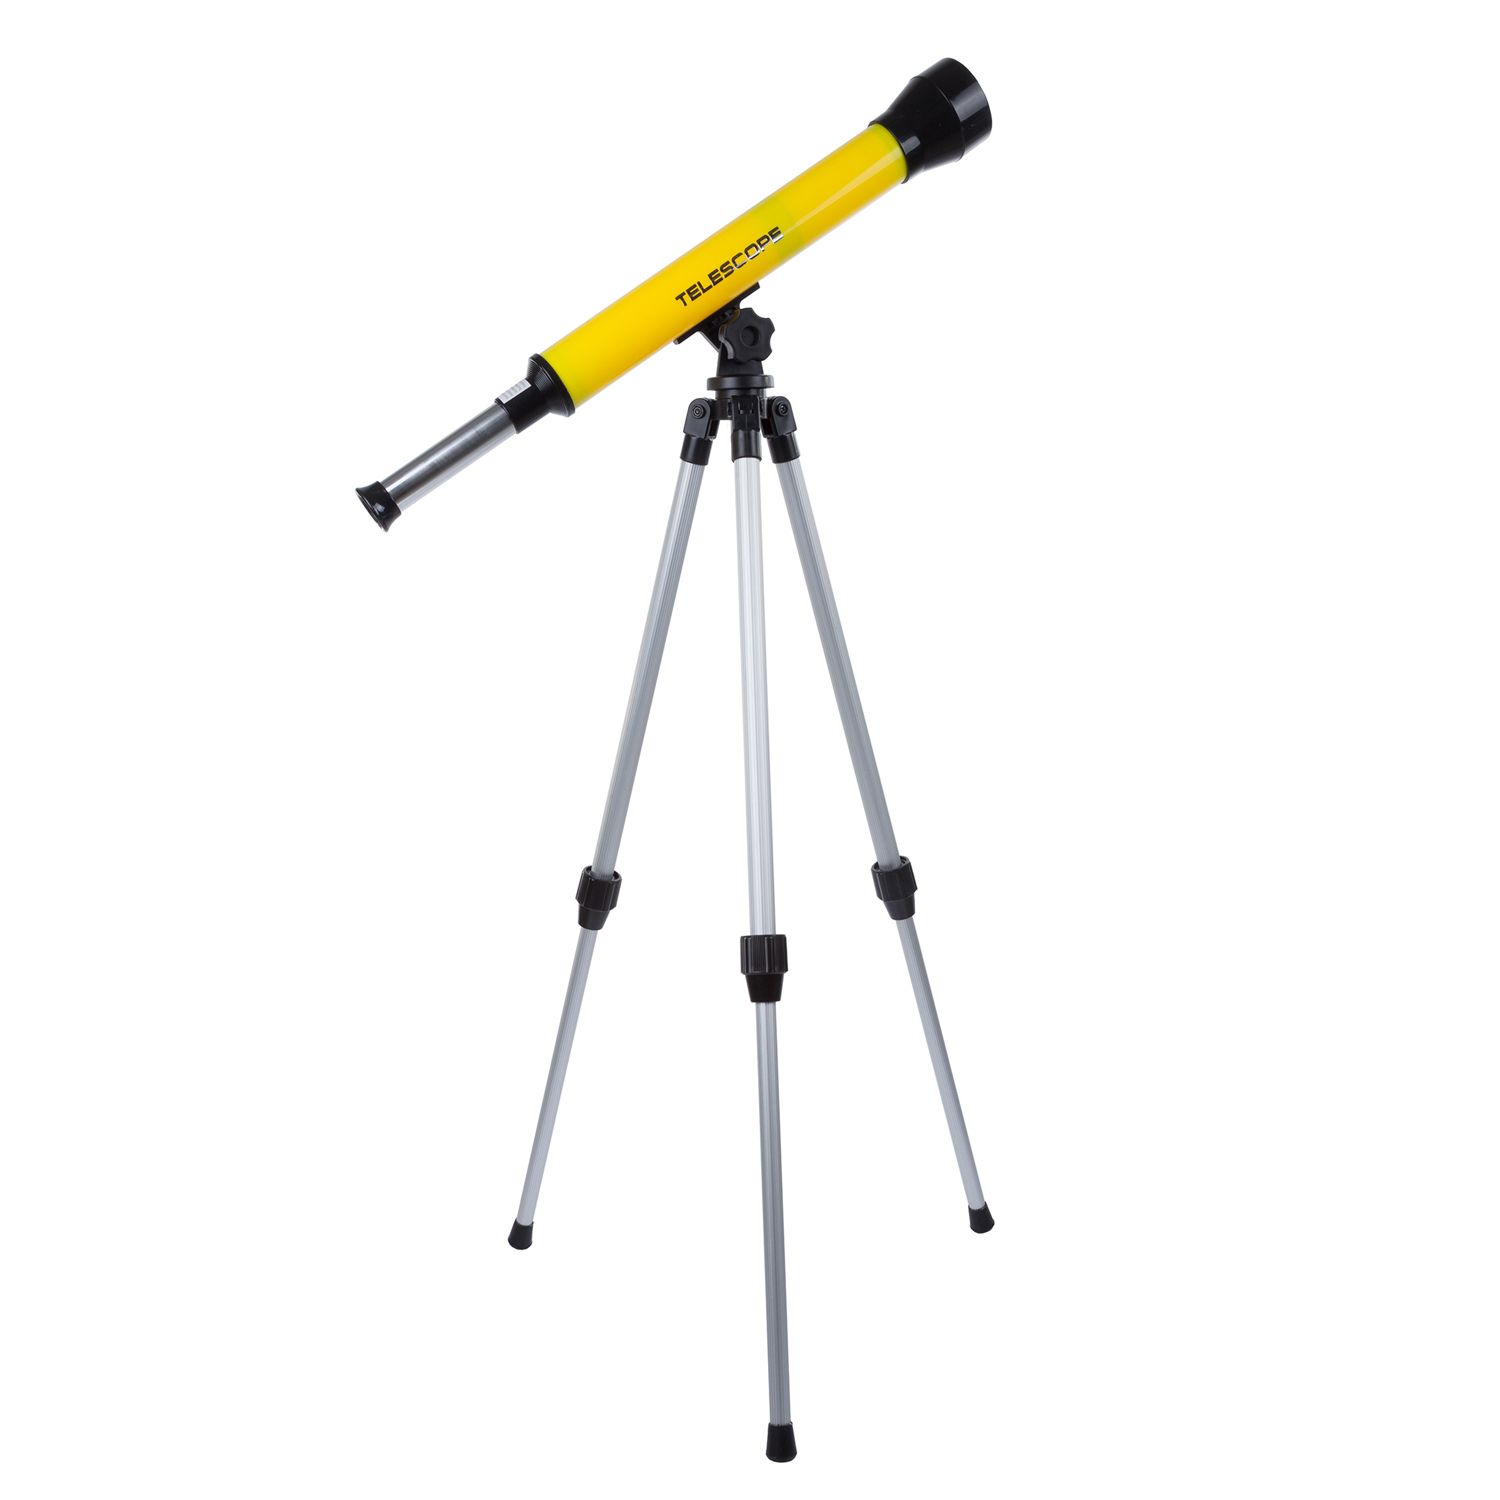 Image for Hey! Play! 40mm Beginner Telescope with Adjustable Tripod and 30x Magnification at Kohl's.